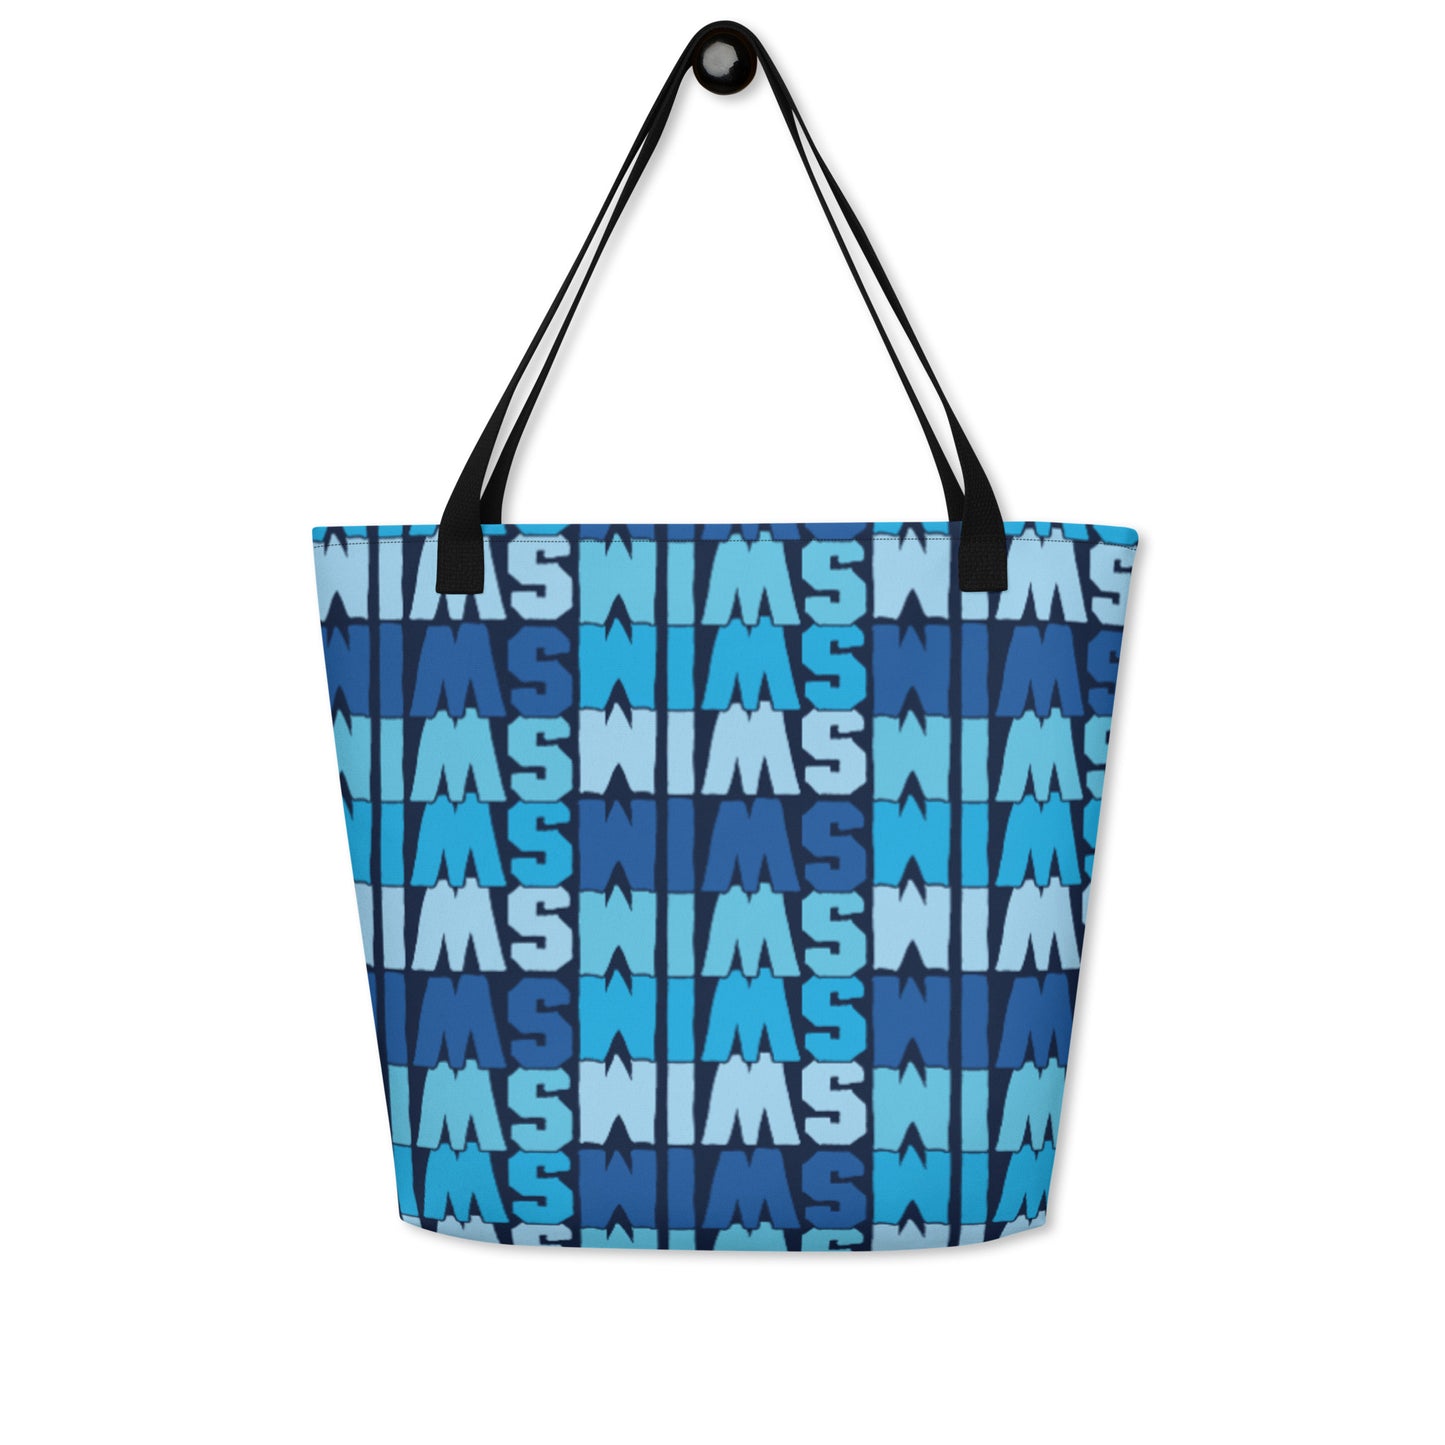 Swimmer All-Over Print Large Tote Bag